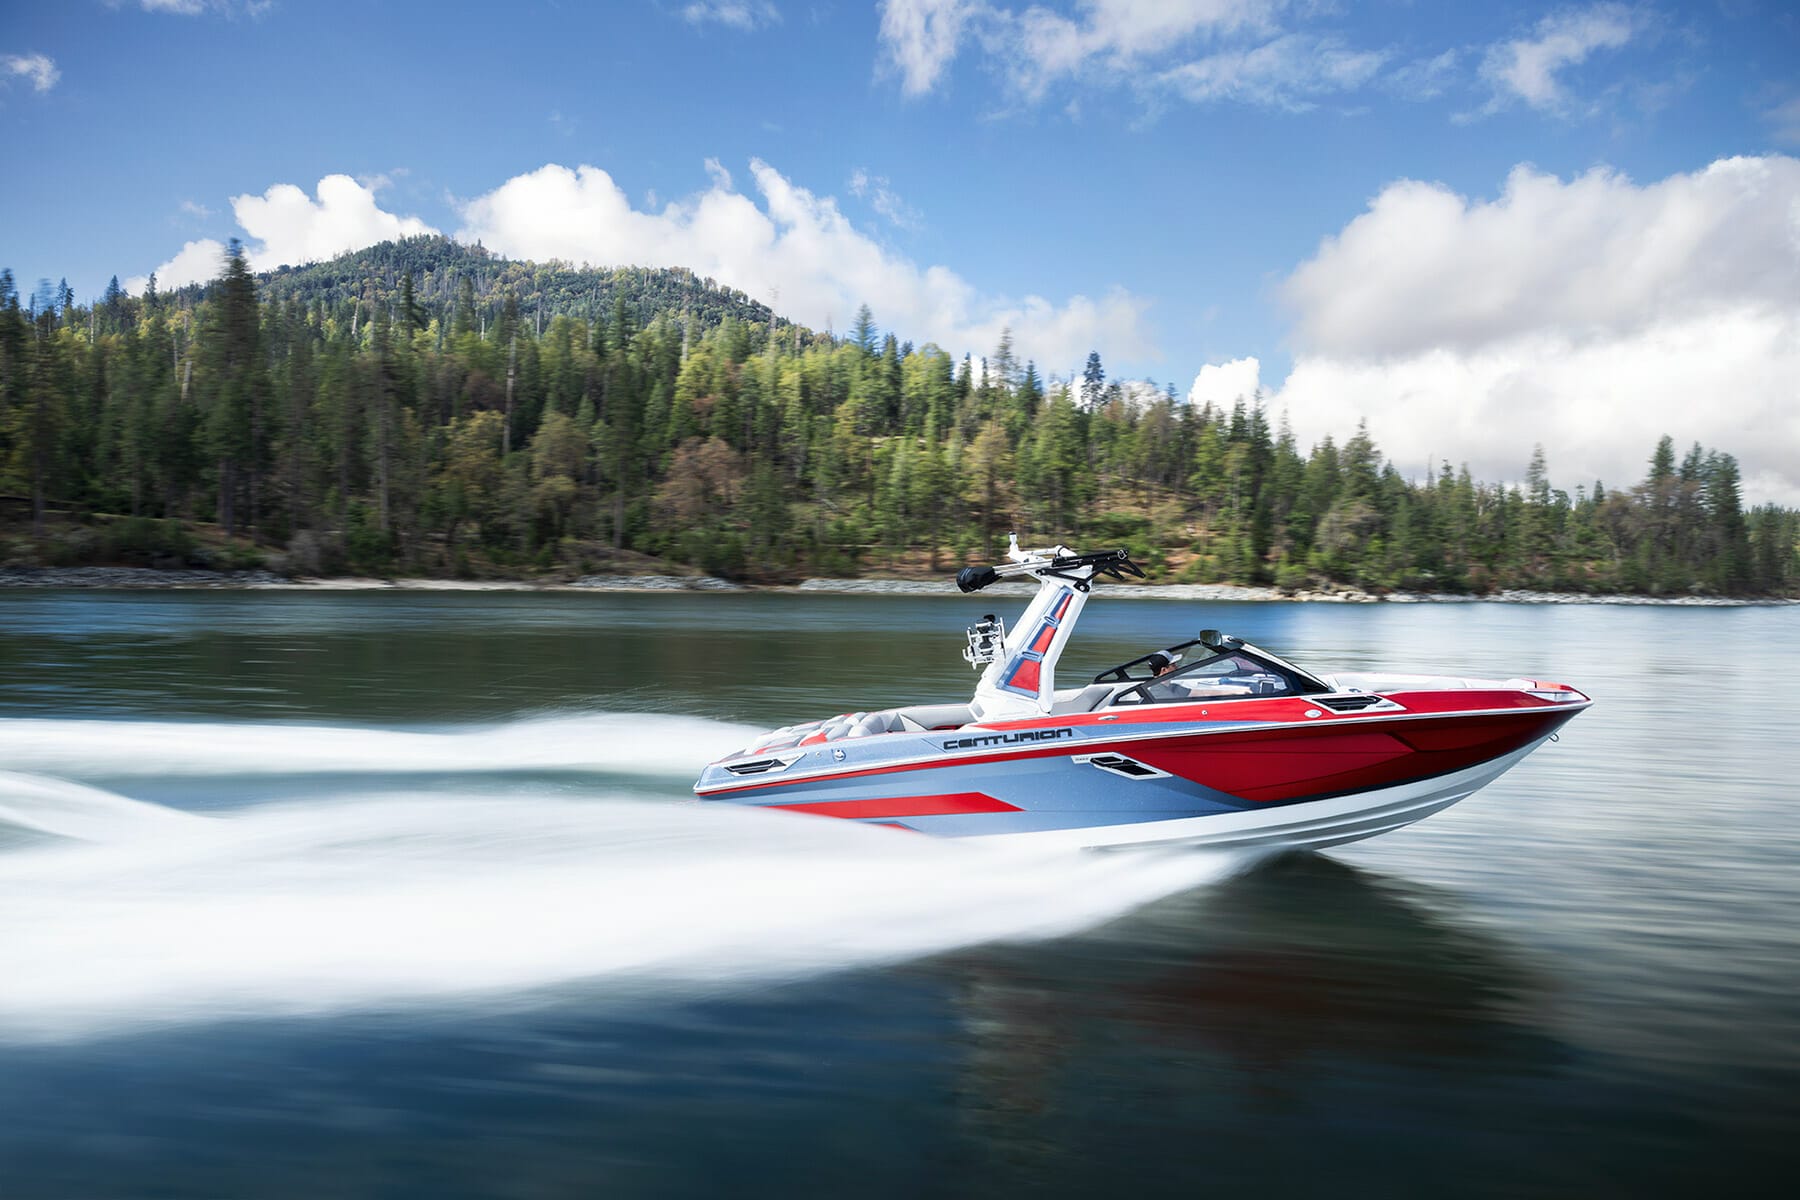 A red and white wakeboat speeding through a body of water.